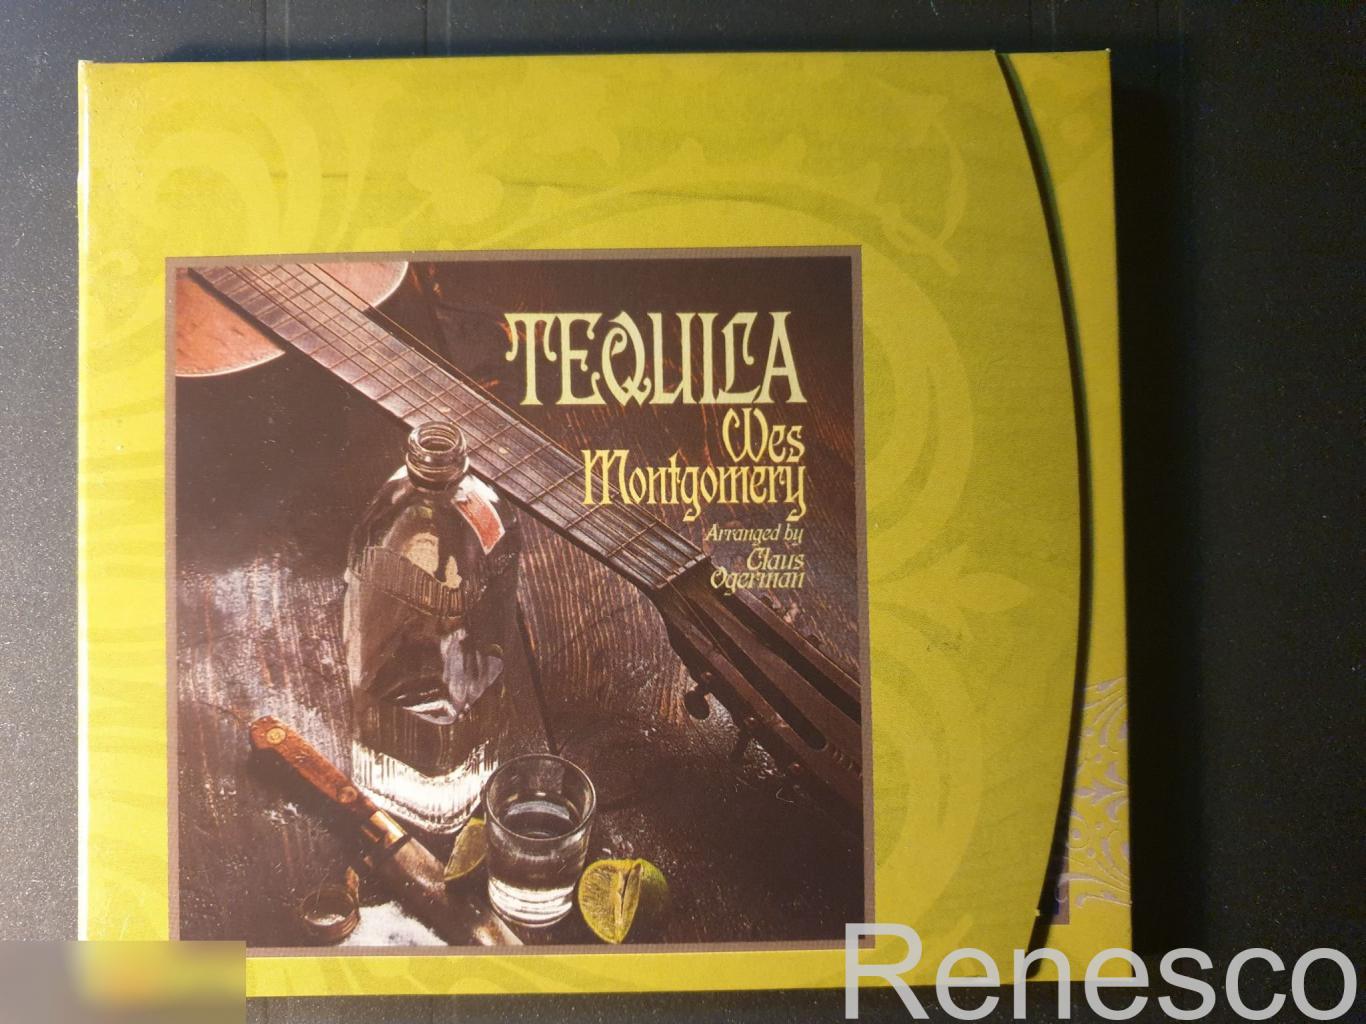 (CD) Wes Montgomery ?– Tequila (1999) (Europe)